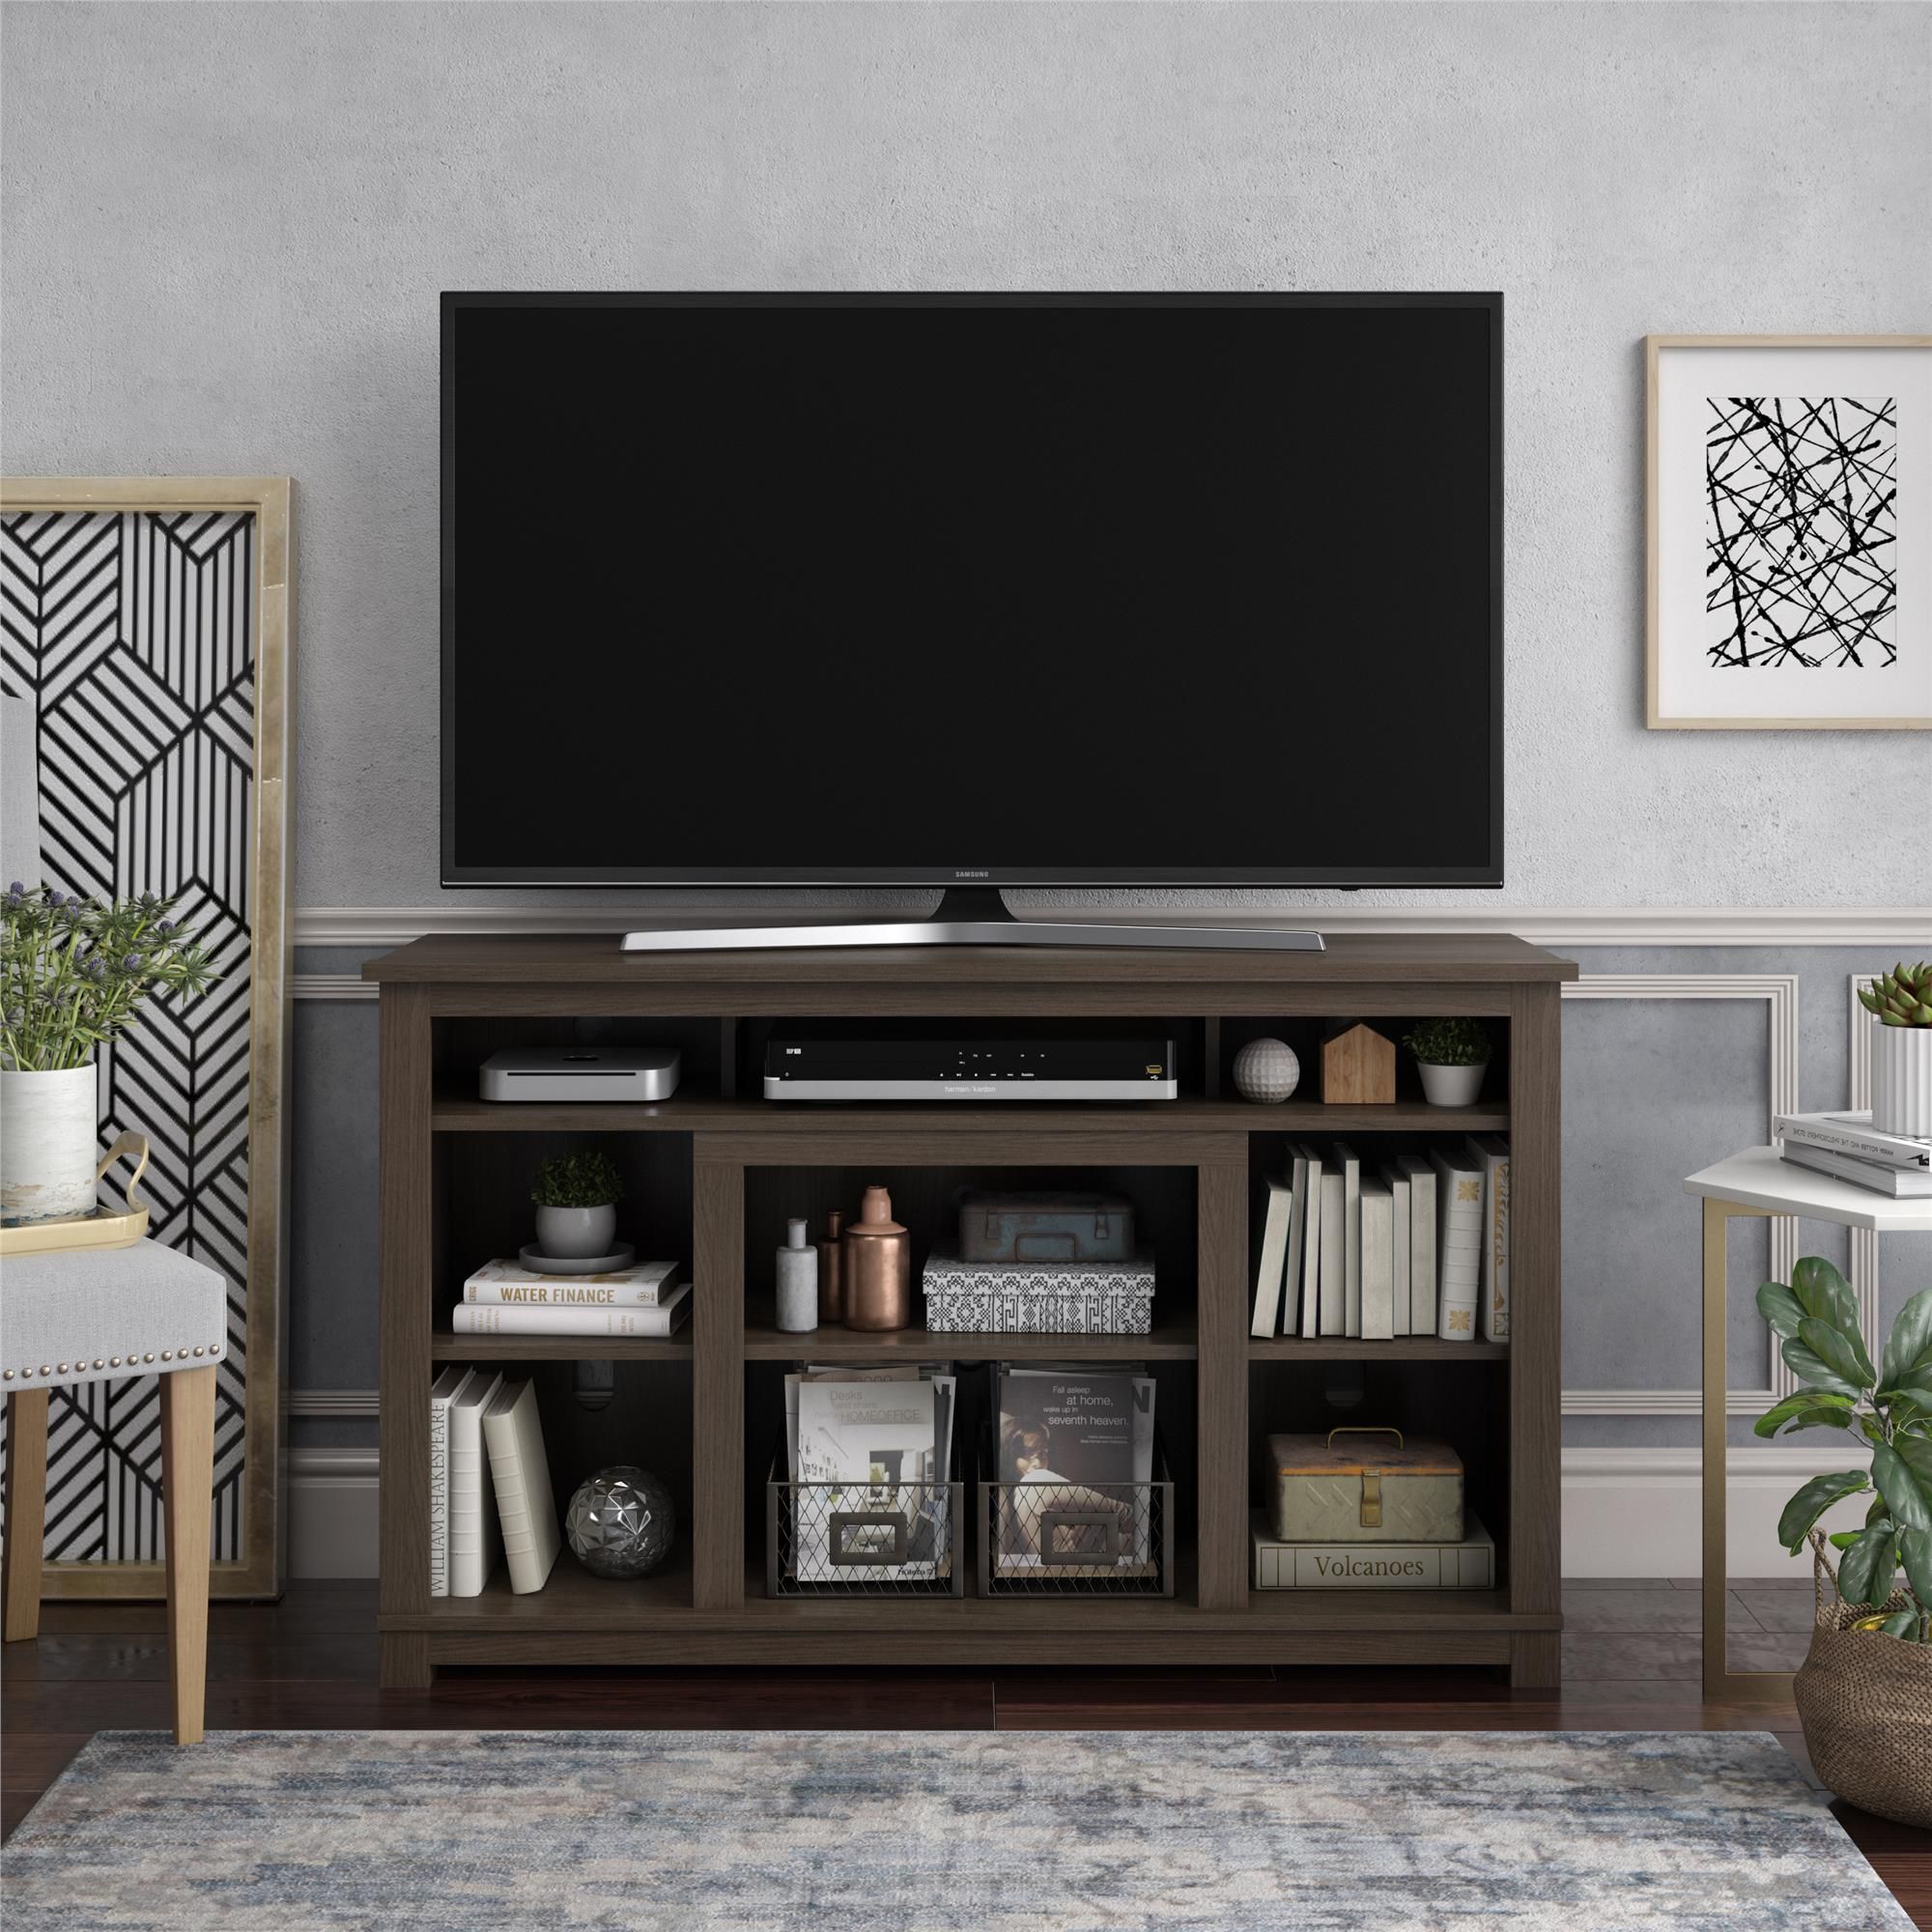 Ameriwood Home Edgewood Tv Stand For Tvs Up To 55 Throughout Spellman Tv Stands For Tvs Up To 55" (View 11 of 15)